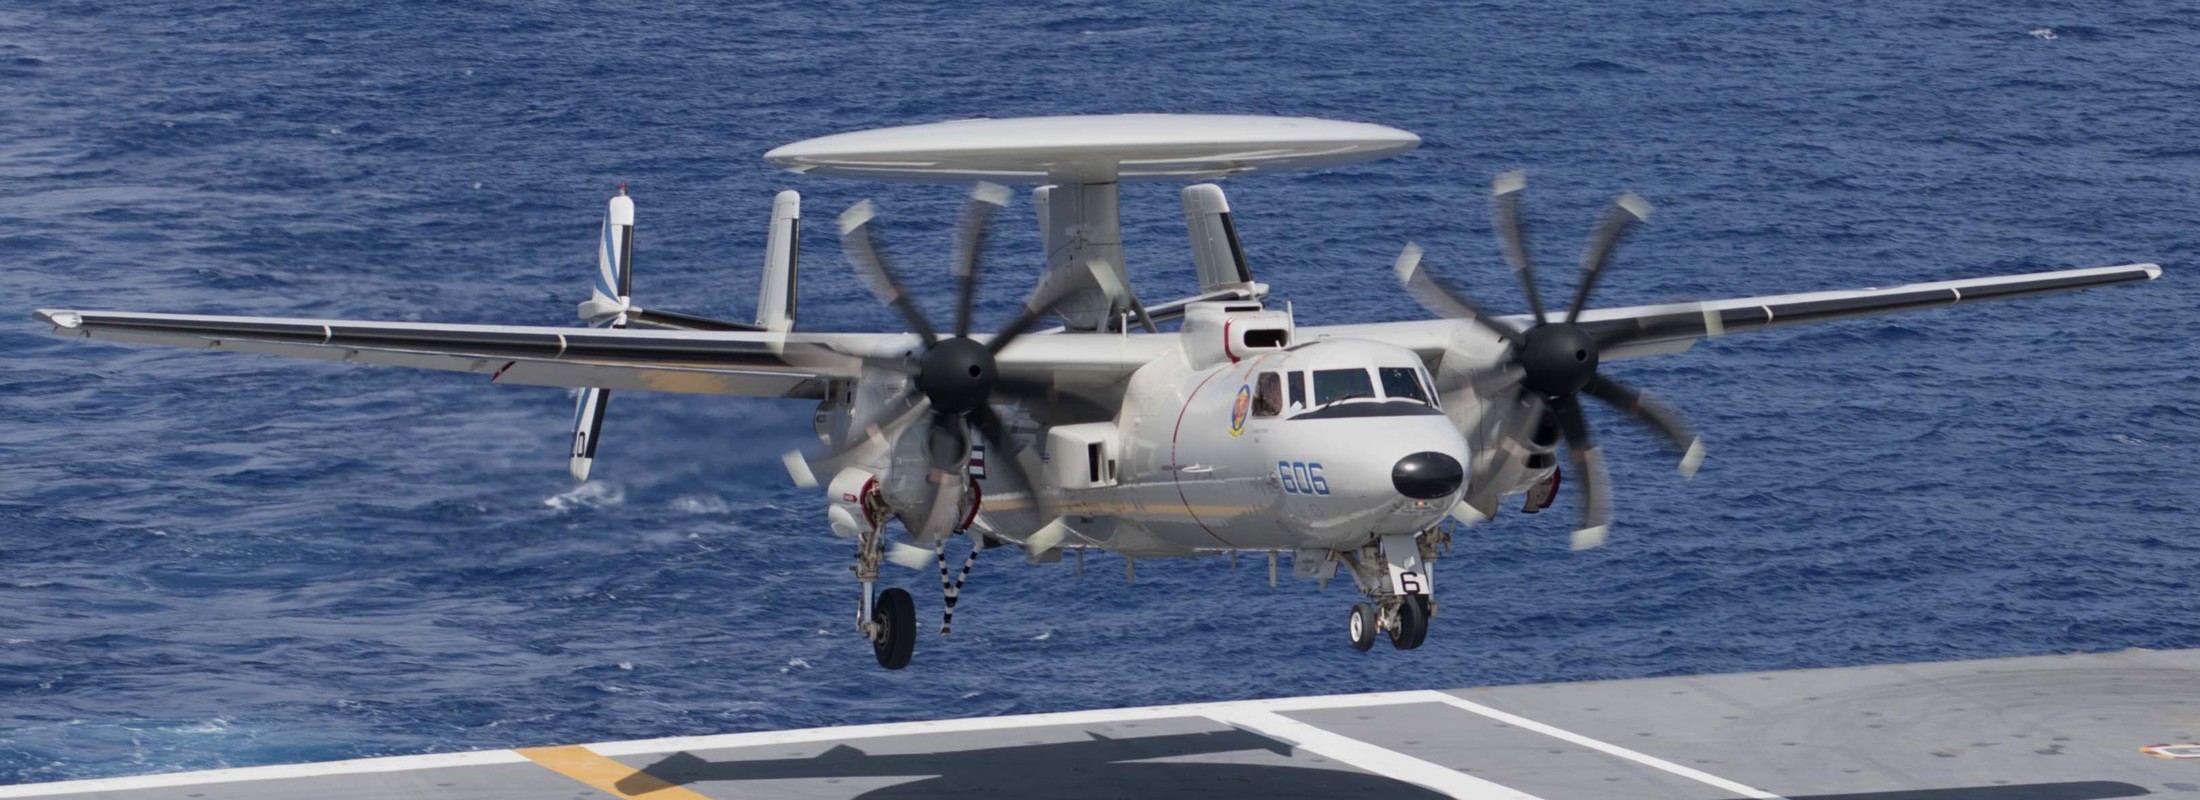 vaw-121 bluetails carrier airborne early warning squadron us navy e-2d advanced hawkeye cvw-7 uss abraham lincoln cvn-72 54